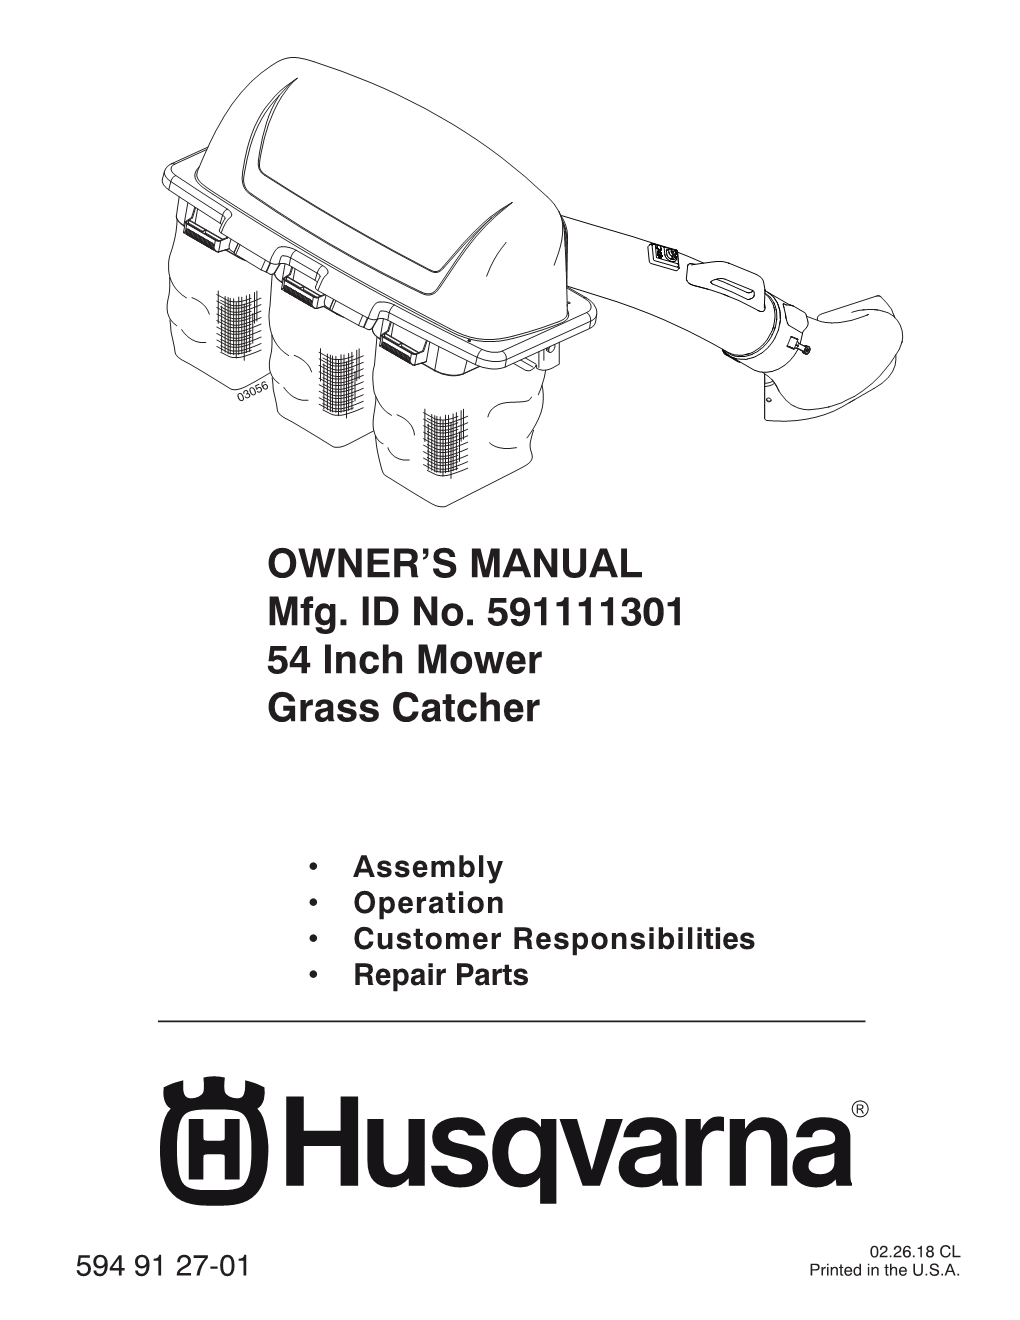 OWNER's MANUAL Mfg. ID No. 591111301 54 Inch Mower Grass